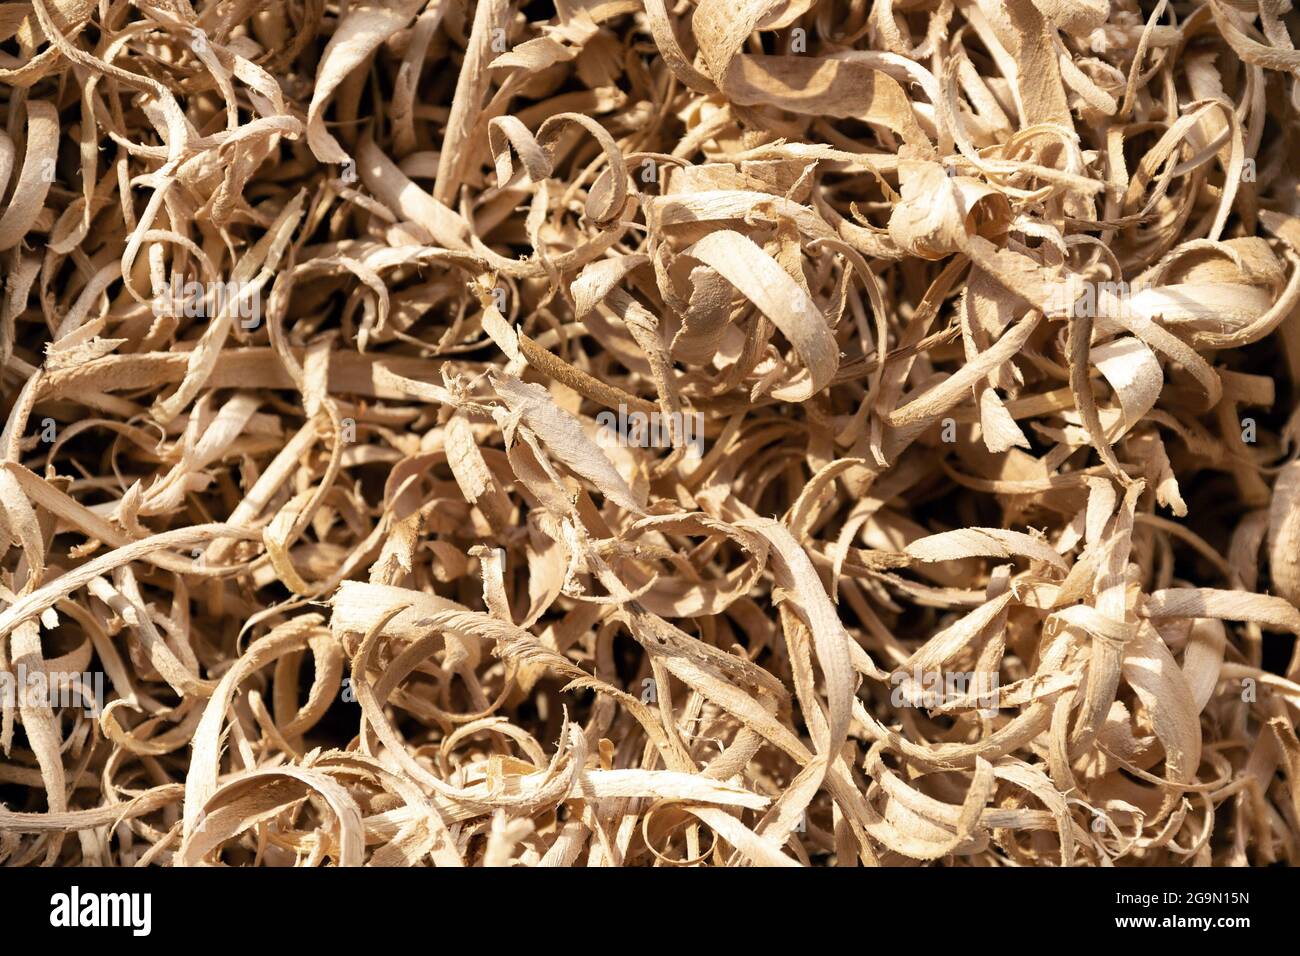 Closeup od wood shavings in a carpentry workshop Stock Photo